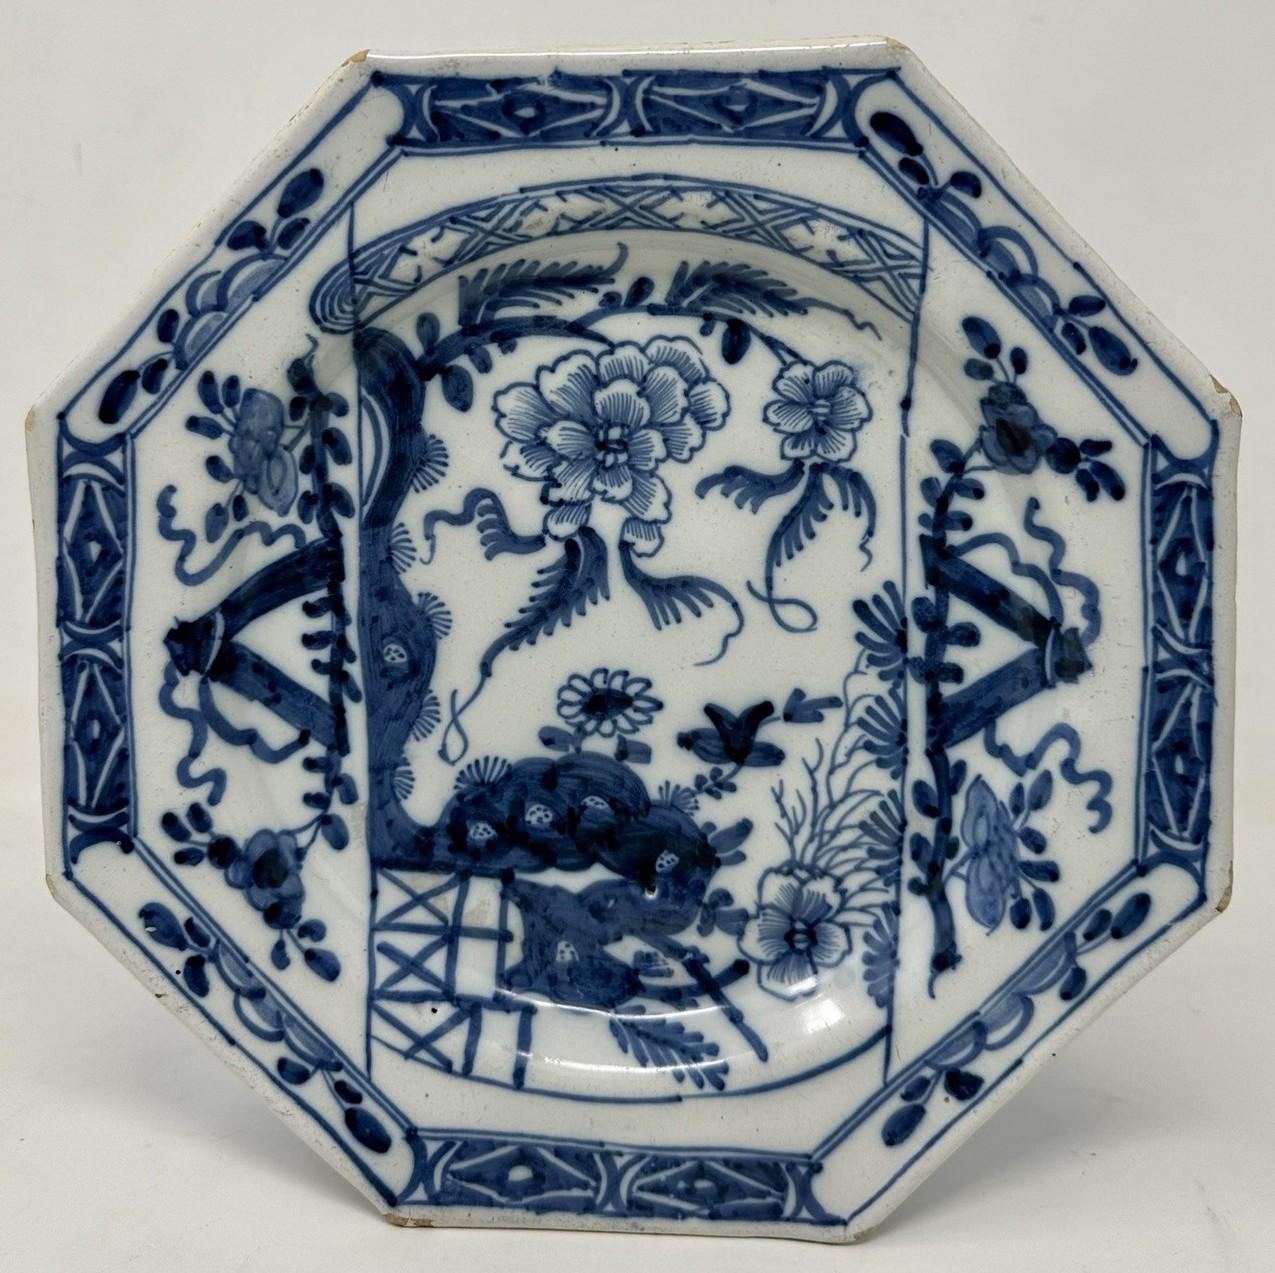 An Extremely Rare Pair Hand Decorated Irish Delft ware wall hanging Charger or Cabinet Dublin Deep Dish Plates by Henry Delamain of seldom seen octagonal form, each similarly decorated with Peony and other flower heads within a decorative border.